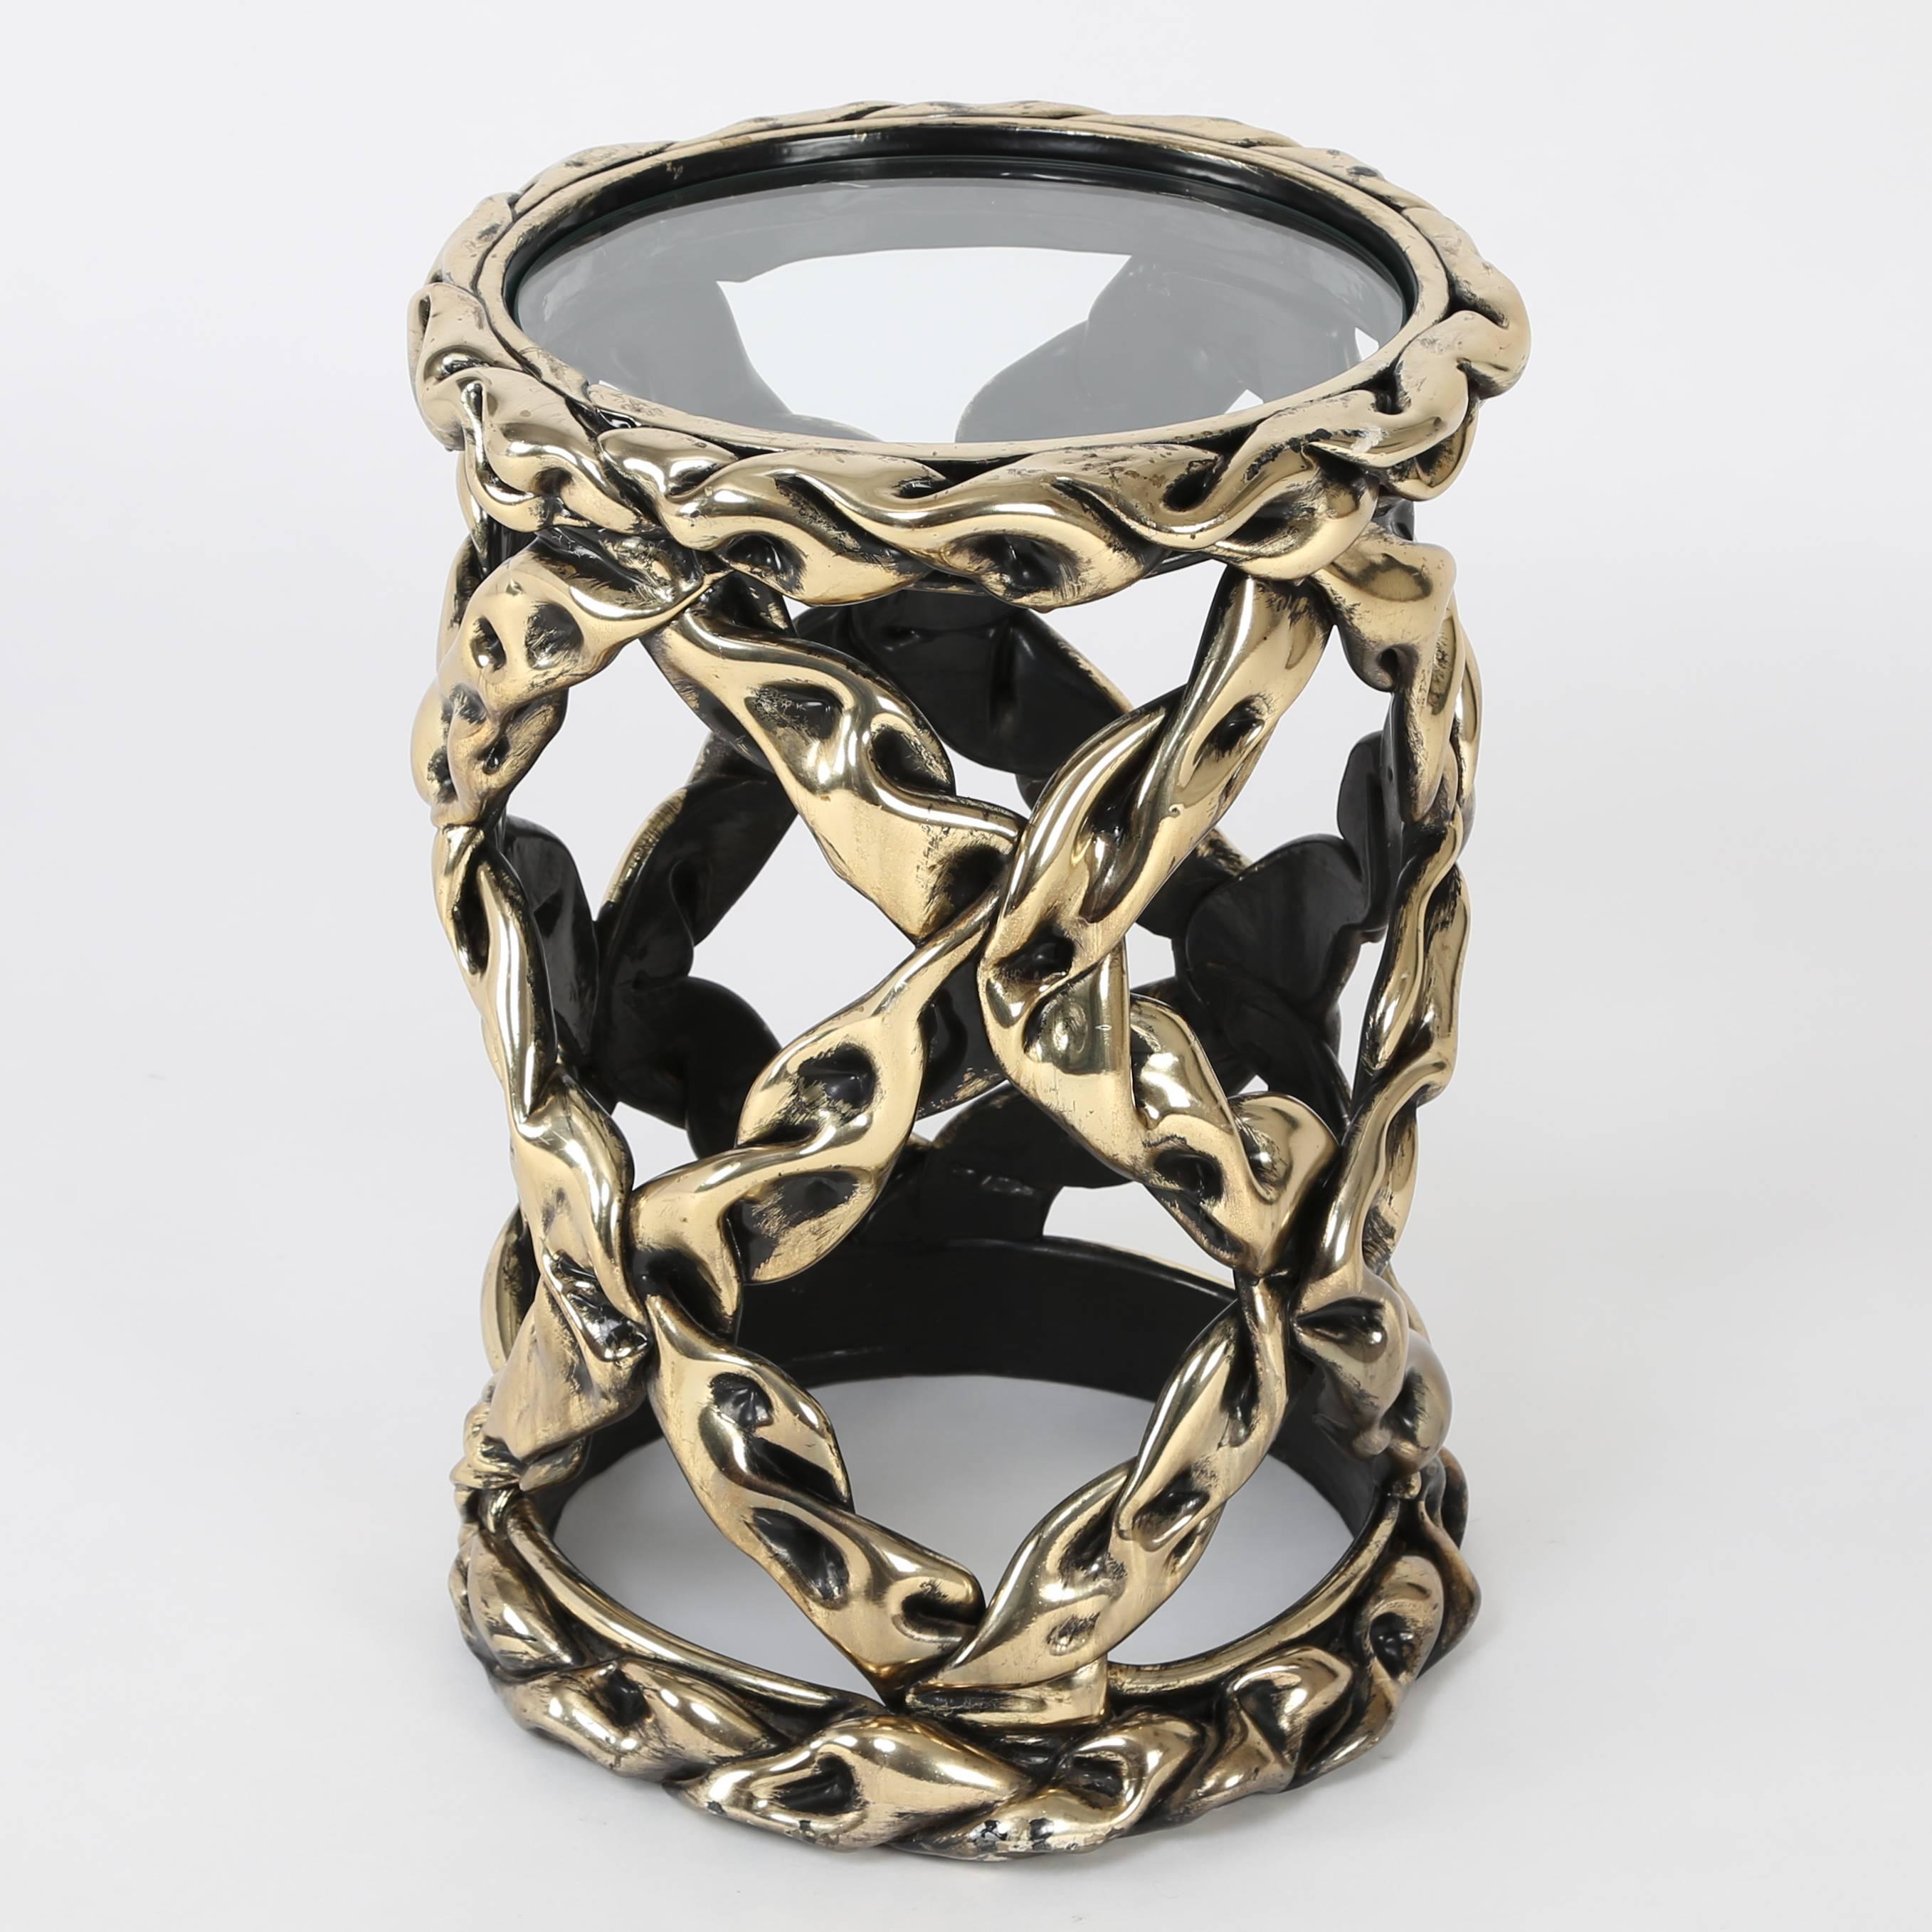 The twisted and interwoven strands of brass and black hued resin lend this table a sense of Brutalist chic, two words we don't often use to describe the same piece of furniture. A great and unusual accent piece. Marked with a 